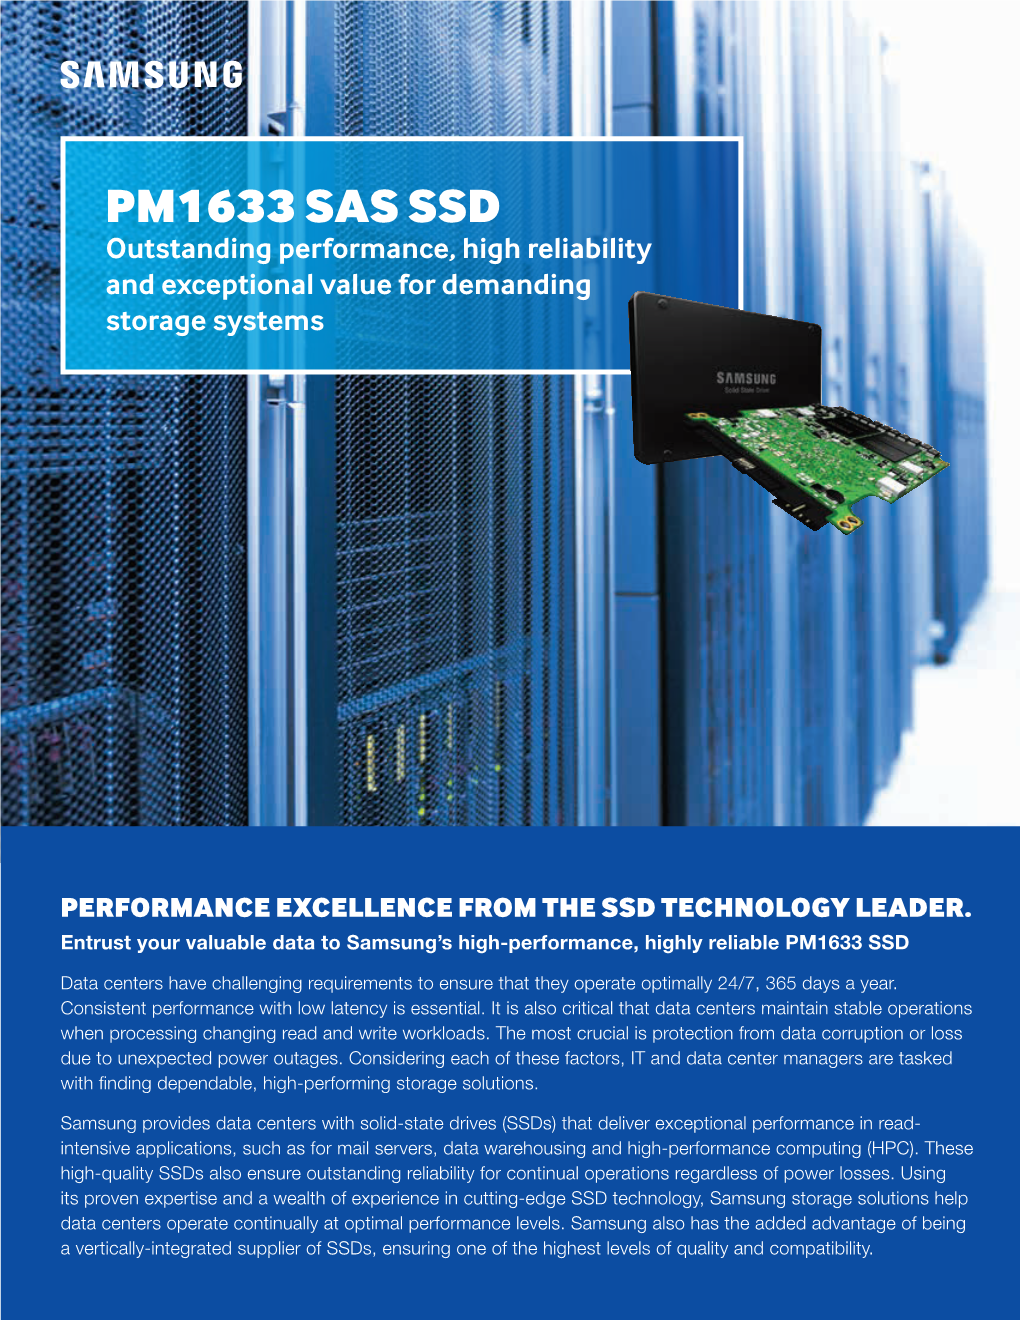 PM1633 SAS SSD Outstanding Performance, High Reliability and Exceptional Value for Demanding Storage Systems